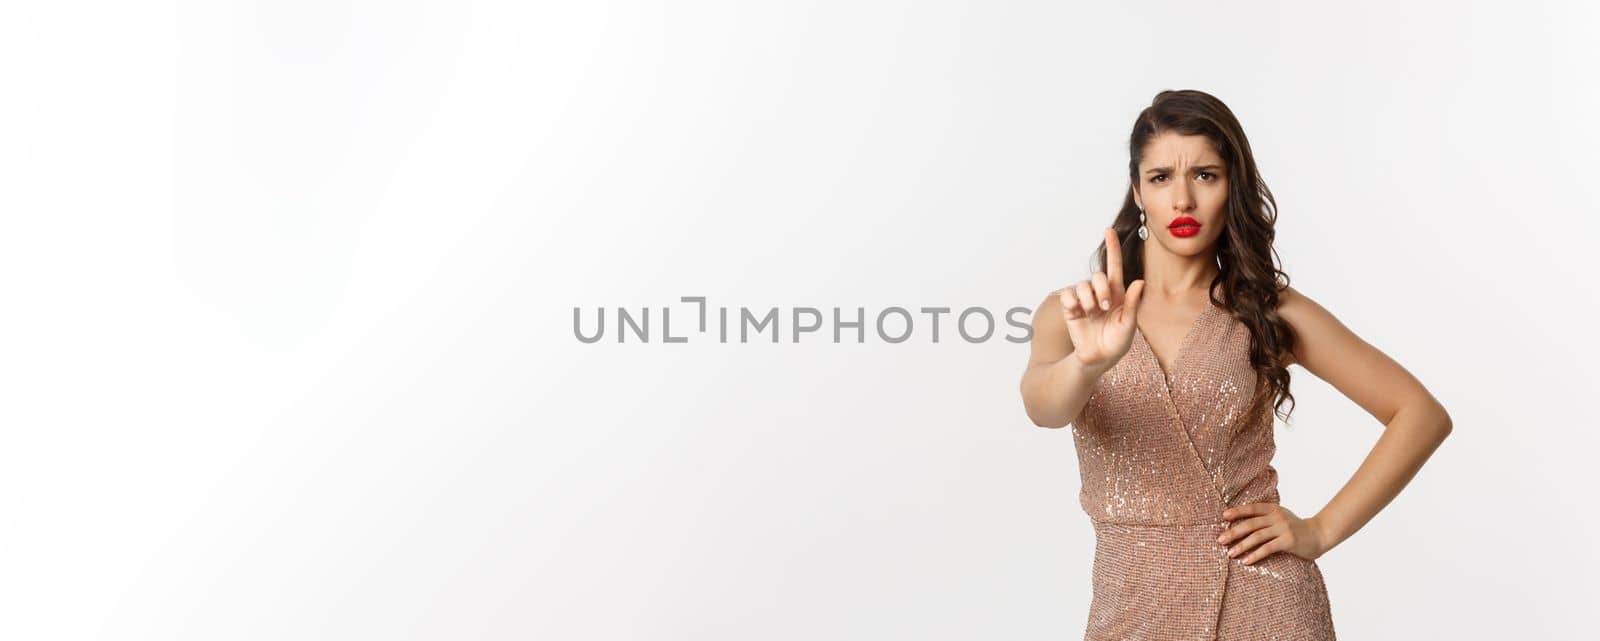 Concept of celebration, holidays and party. Displeased serious woman in glamour dress shaking fingers disapproval, prohibit something, telling no, white background.